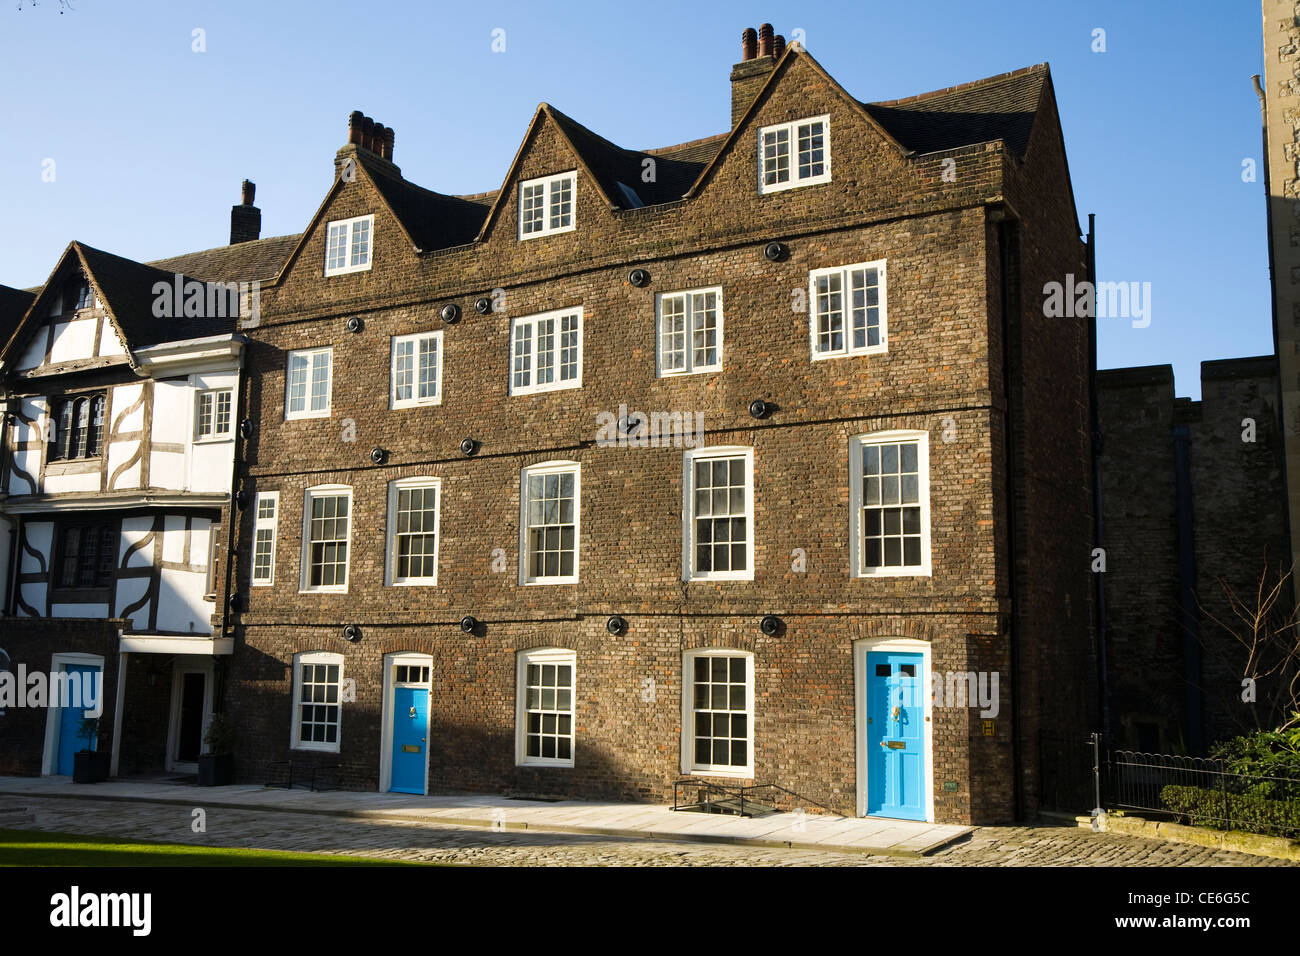 Old terrace / terraced houses  / housing / apartment / accommodation, close to Queen's House, at The Tower of London. UK. Stock Photo